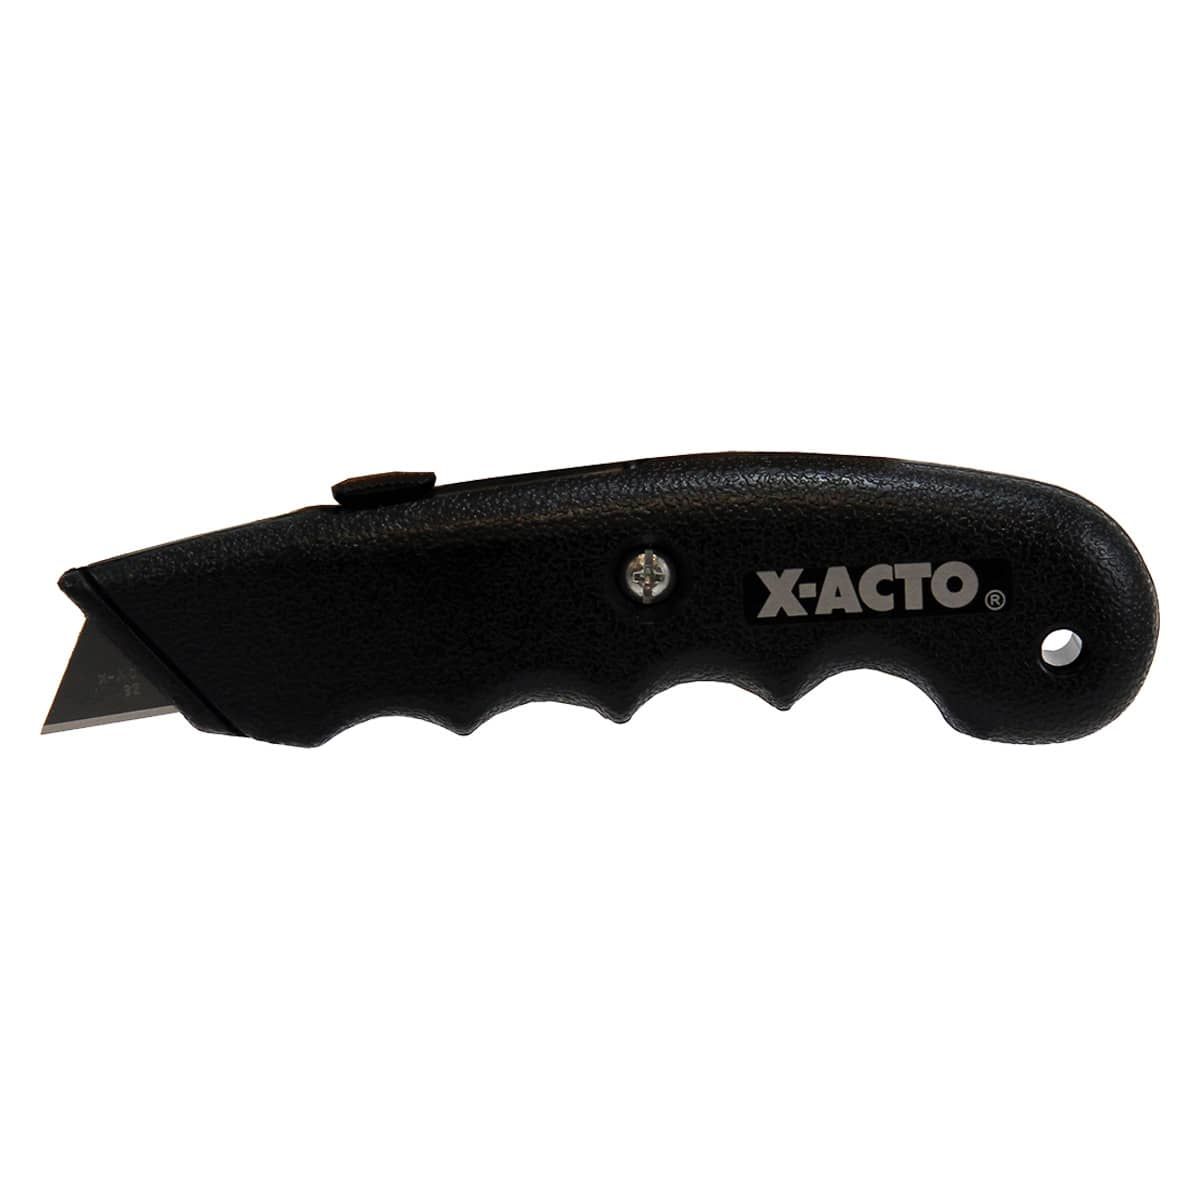 Light-Duty X-acto Knife with Aluminum Handle